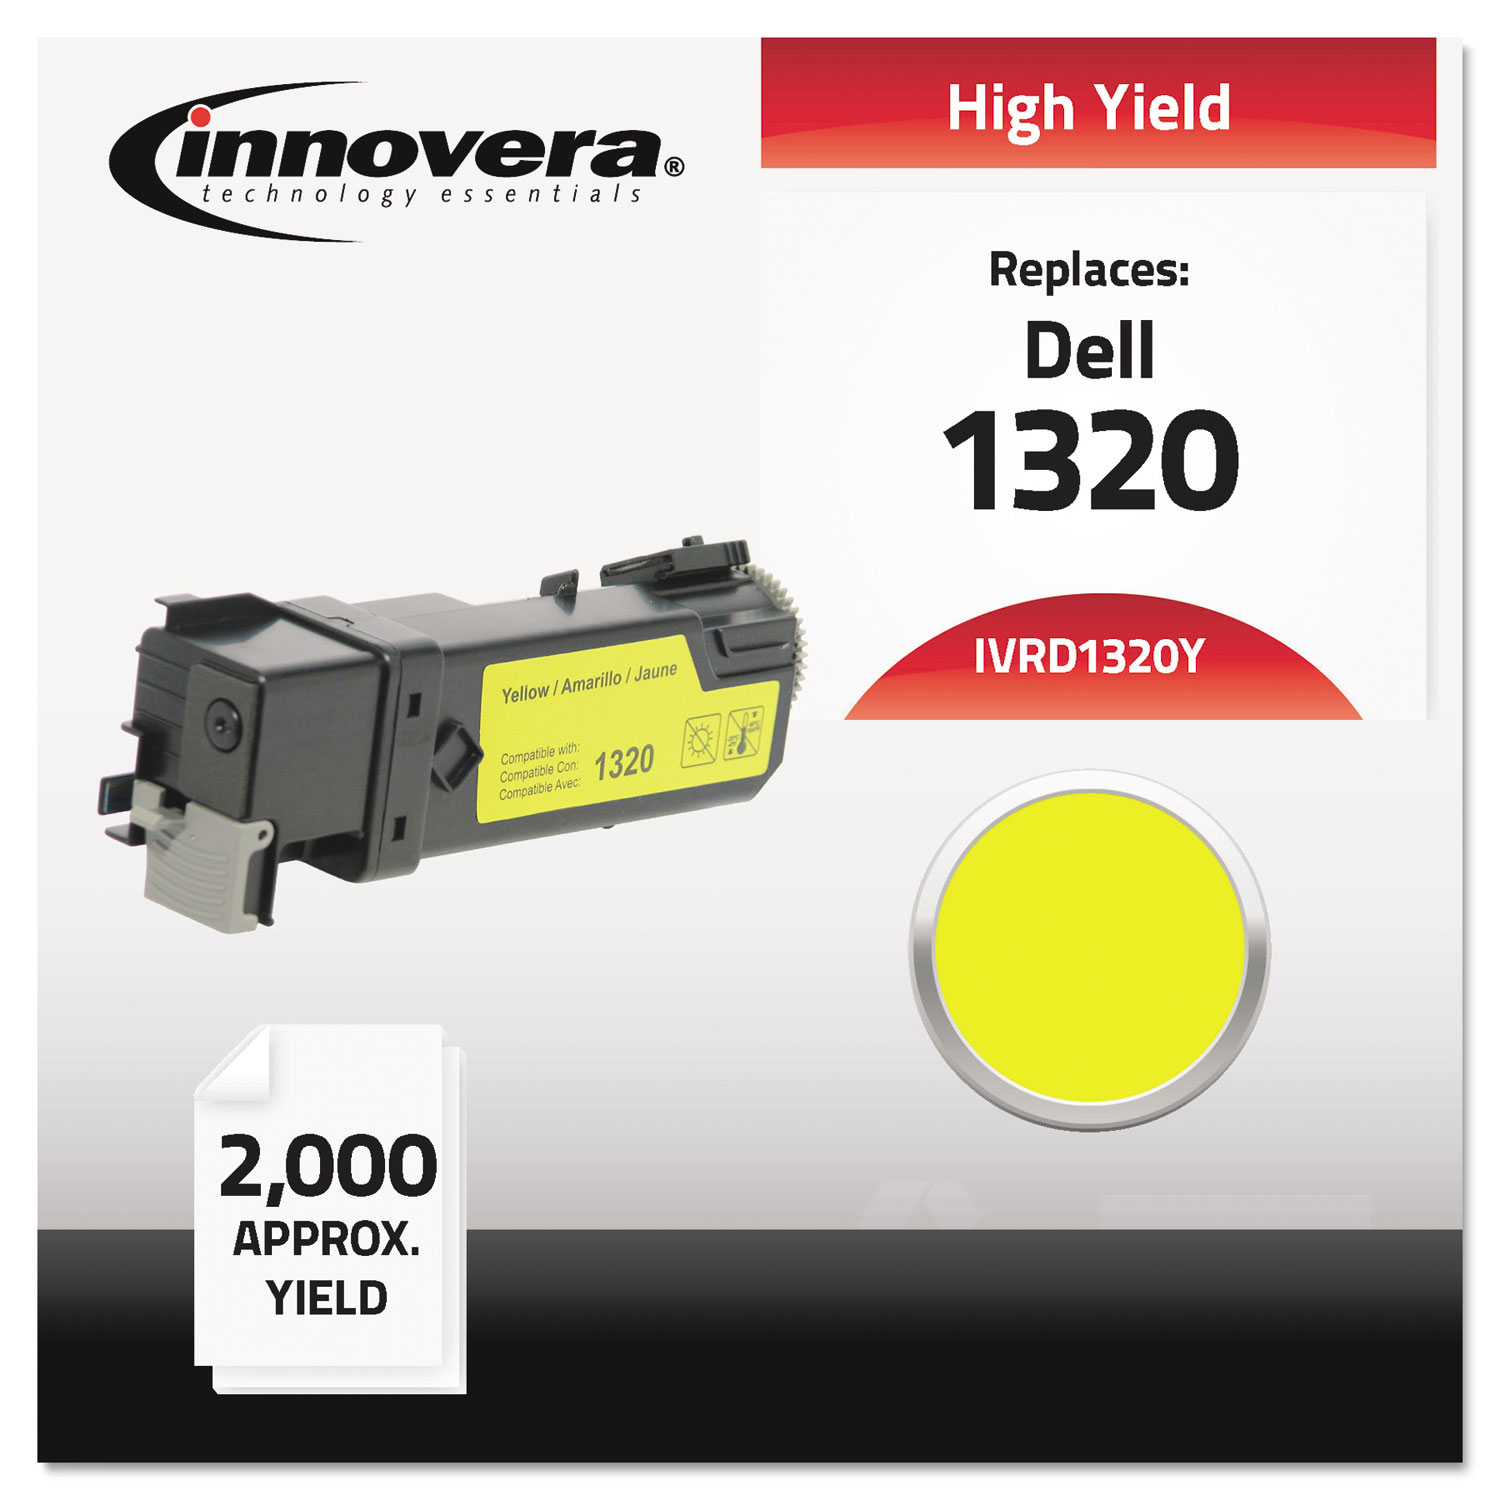  Innovera IVRD1320Y Remanufactured 310-9062 (1320) High-Yield Toner, 2000 Page-Yield, Yellow (IVRD1320Y) 